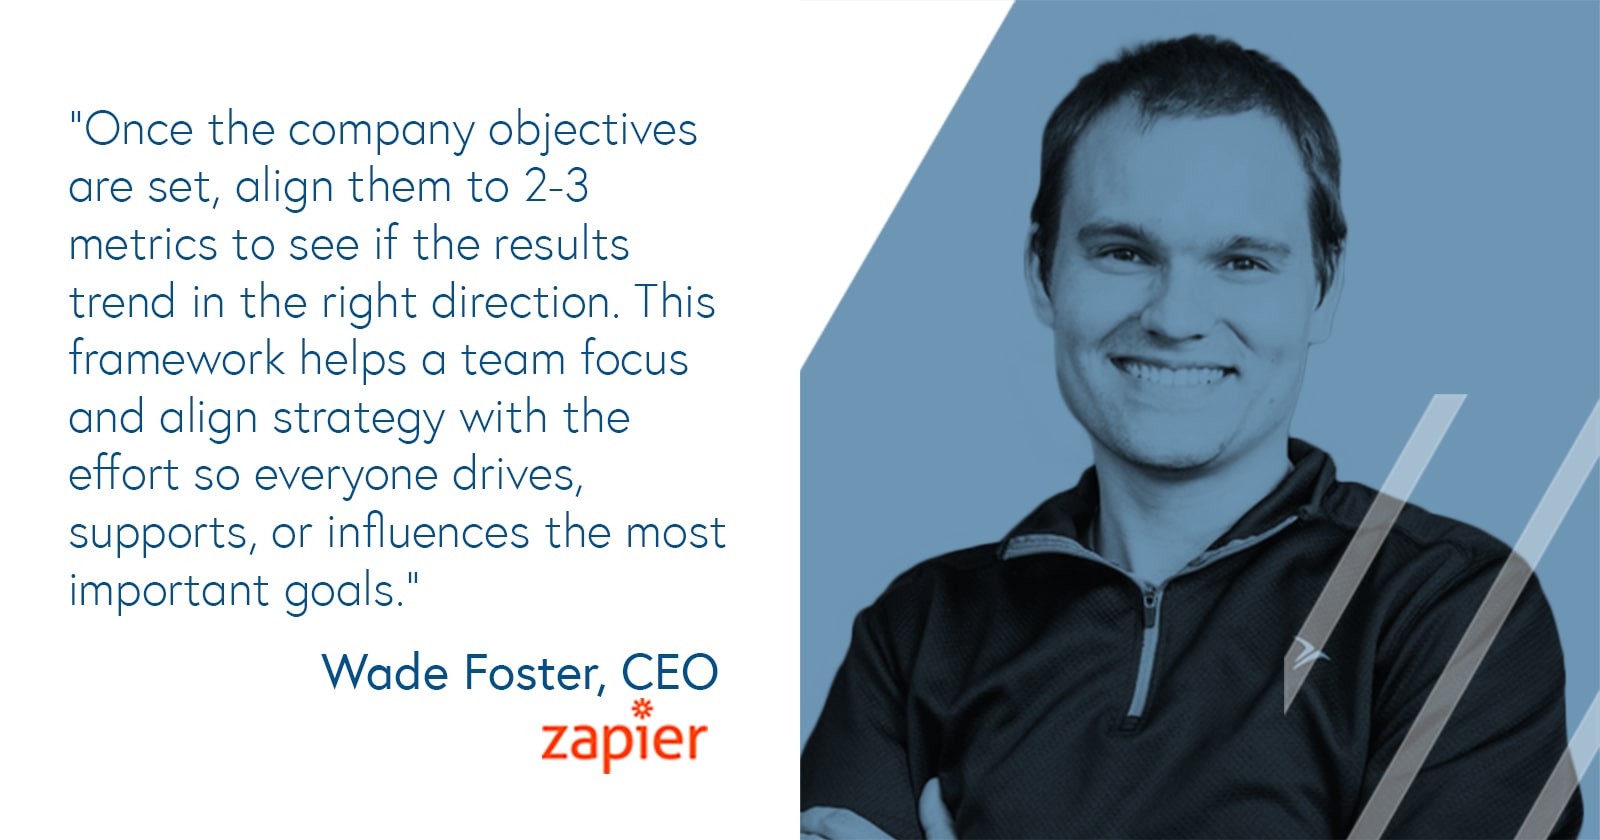 Wade Foster, CEO of Zapier on aligning metrics to your company objectives 